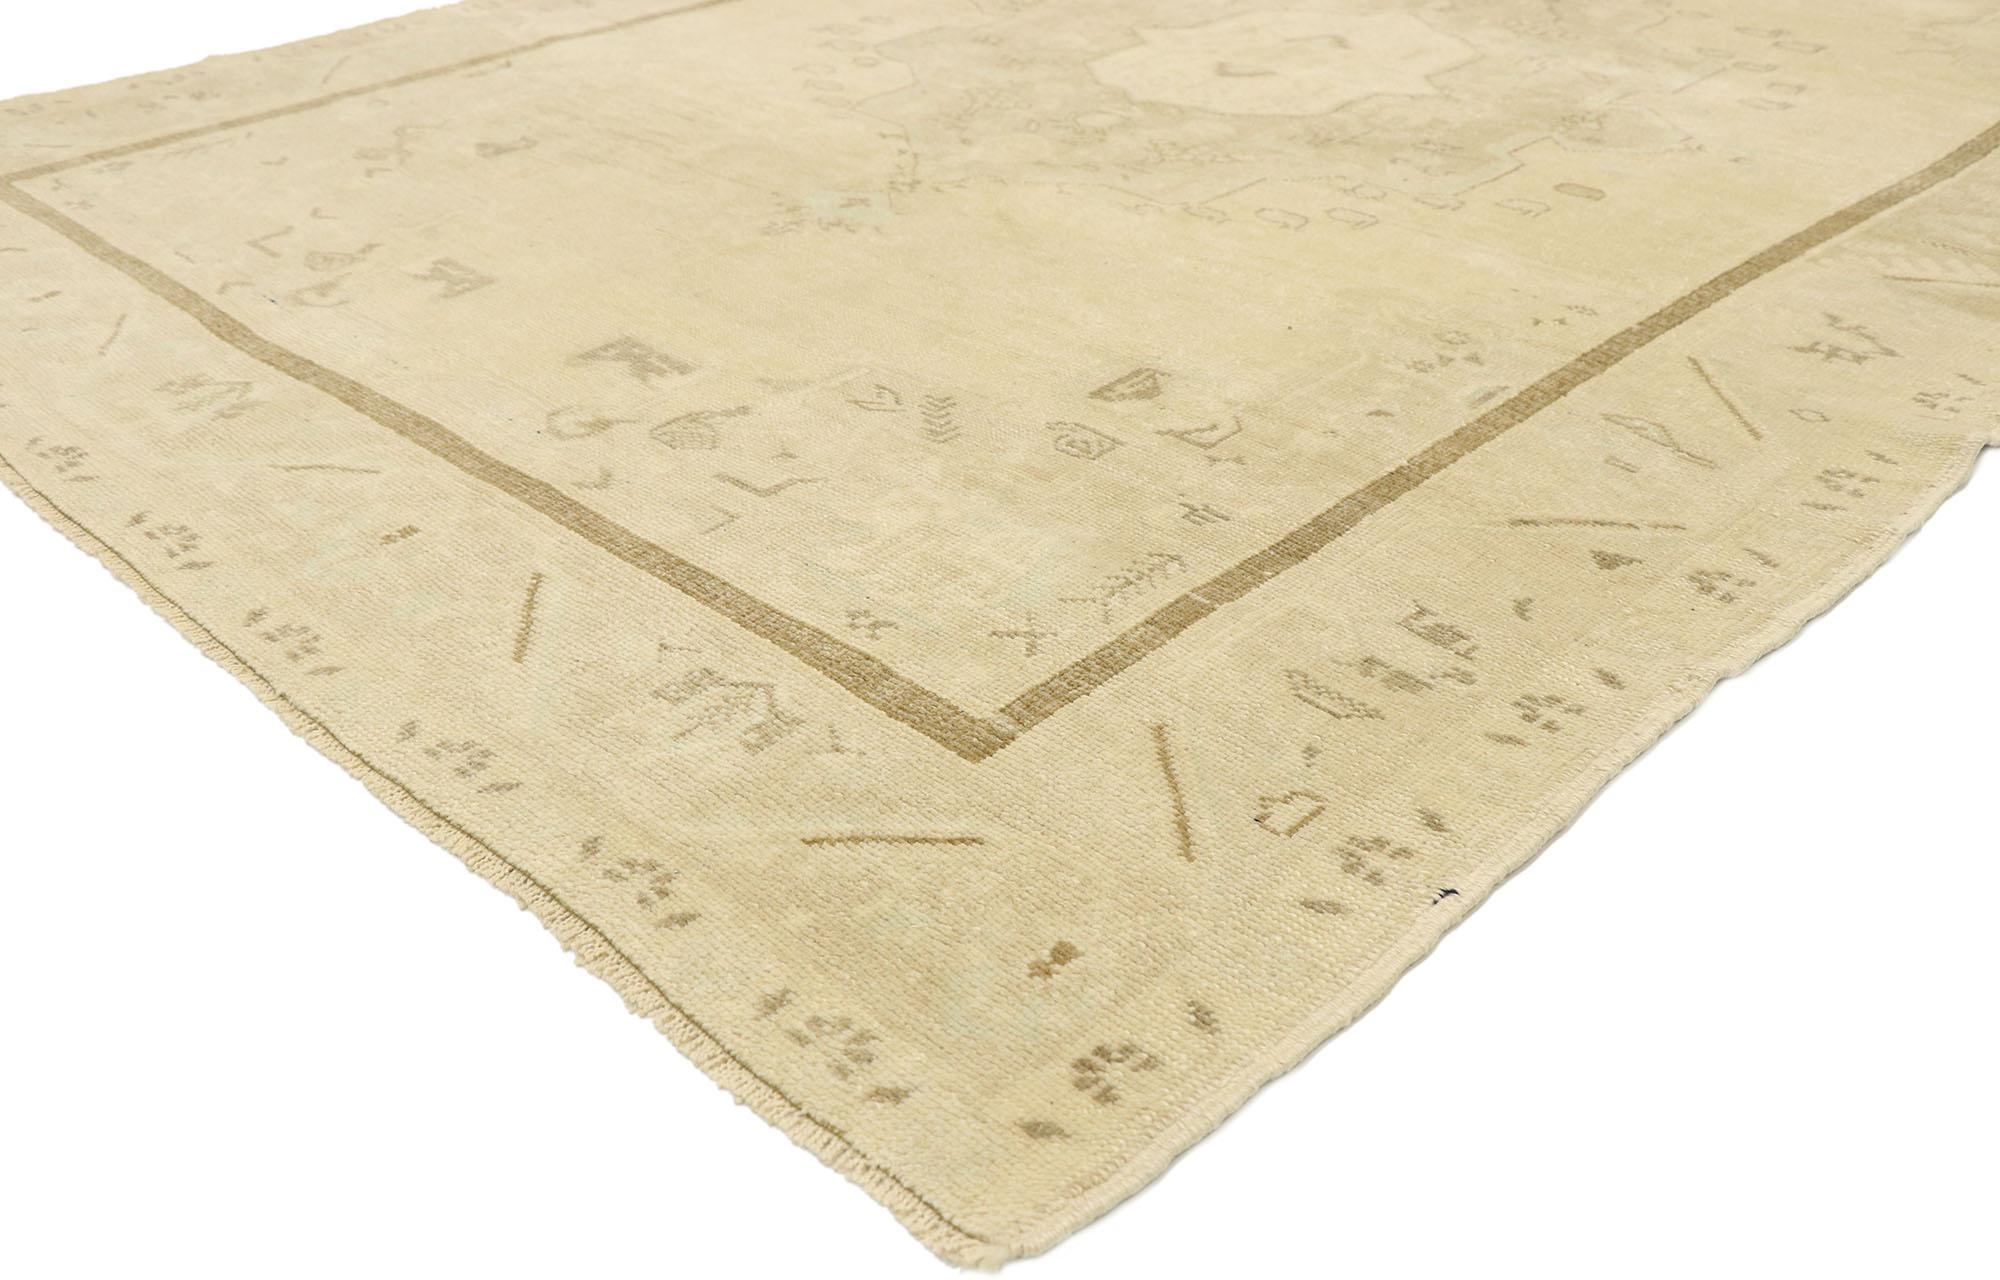 52960 vintage Turkish Oushak rug with Modern Monochromatic Mission style. Emanating sophistication and grace, this hand knotted wool vintage Turkish Oushak rug provides an elegant and genteel design aesthetic with soft subtle hues. A cusped central